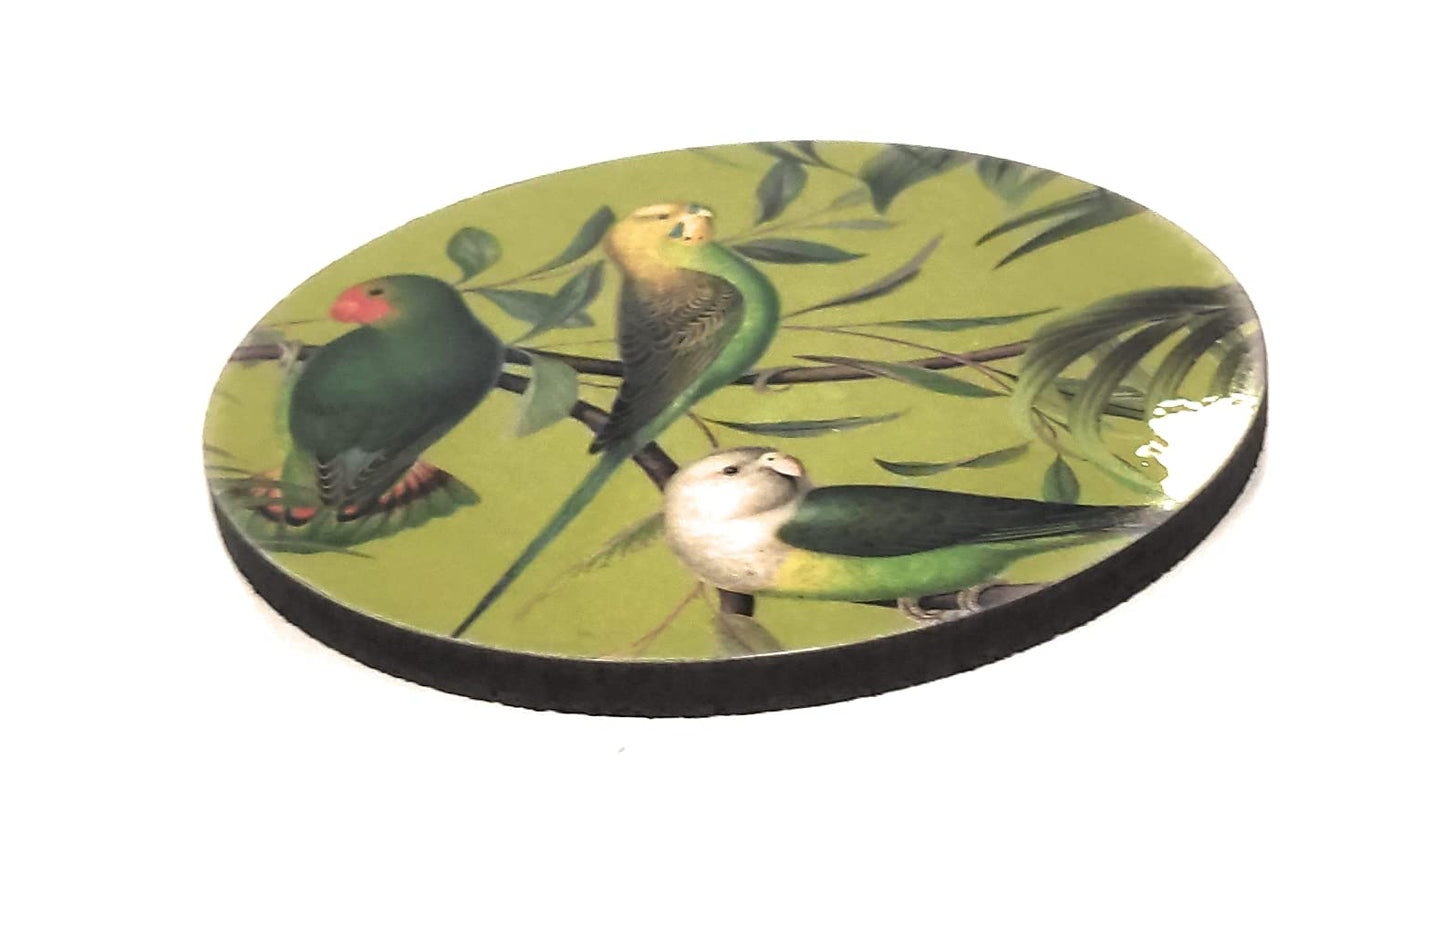 Set of 3 coasters handcrafted in Italy, Compagnia Dell'Elefante